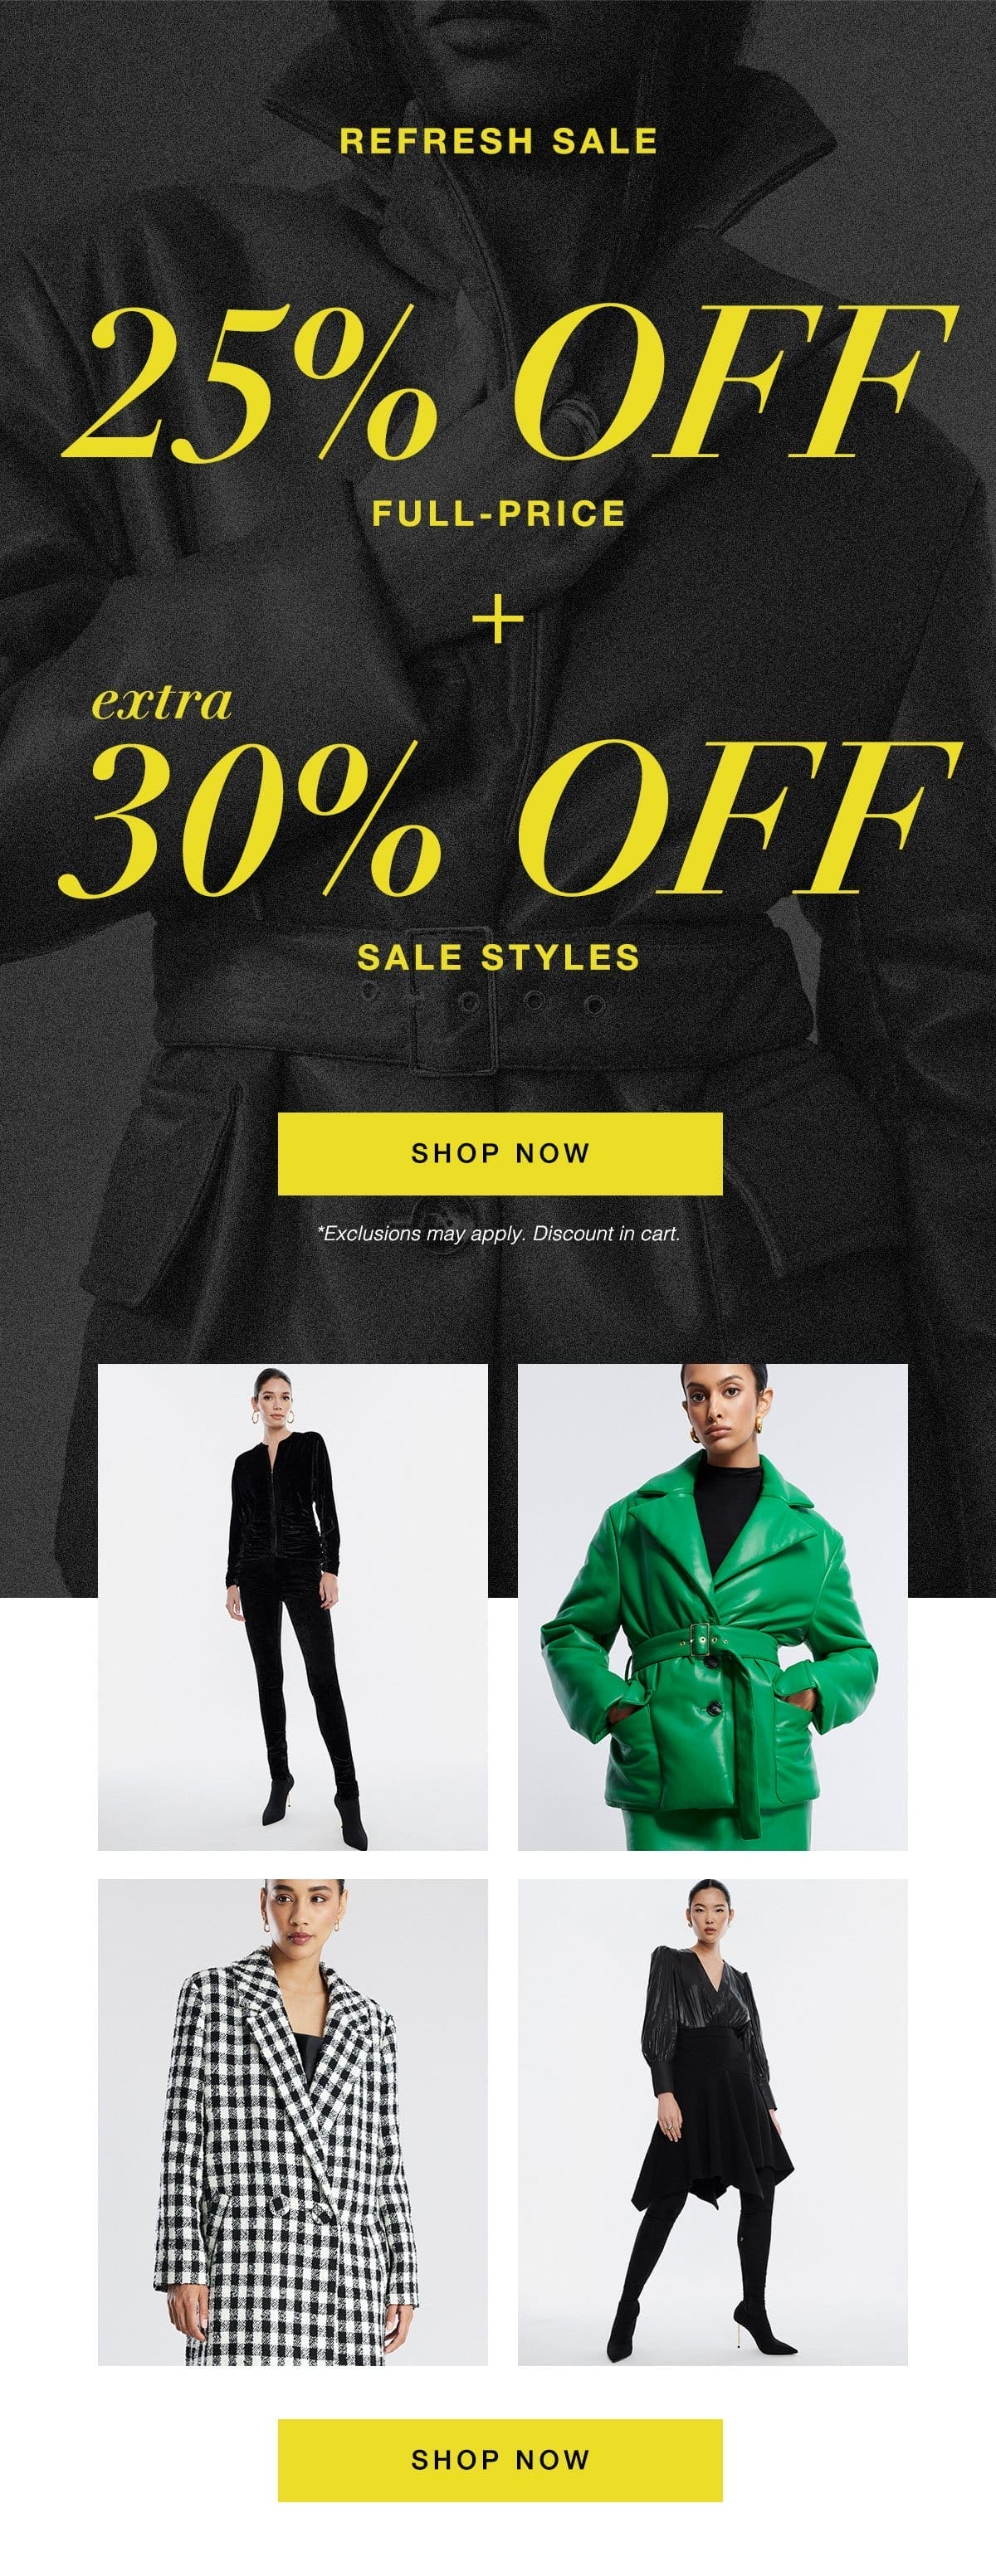 25% Off Full Price + Extra 30% Off Sale Styles